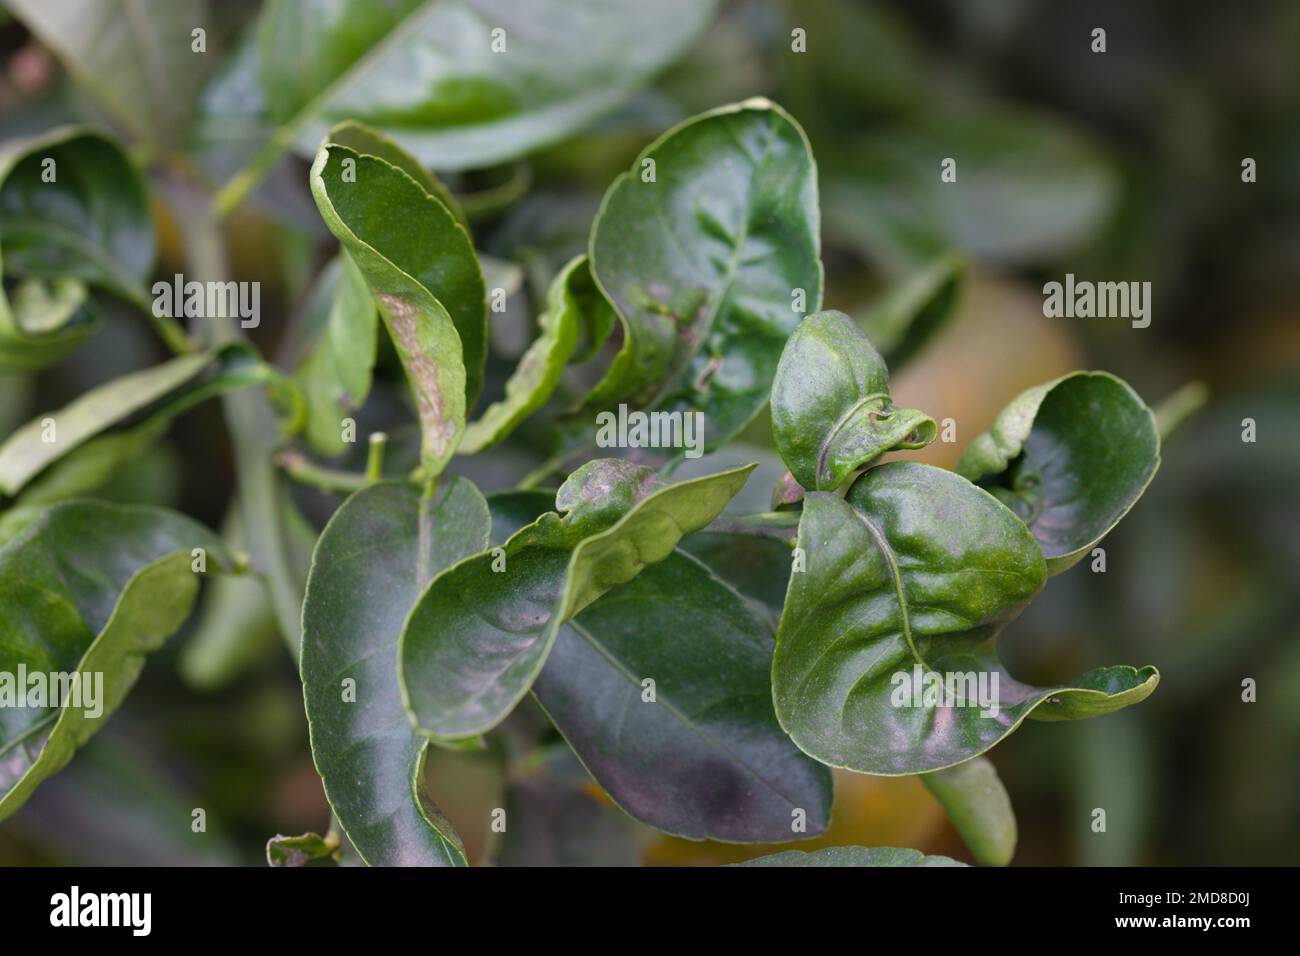 Close-up of some leaves of an orange tree that are being attacked by some type of disease caused by mite infection, leaf miner, mealybug or thrips Stock Photo